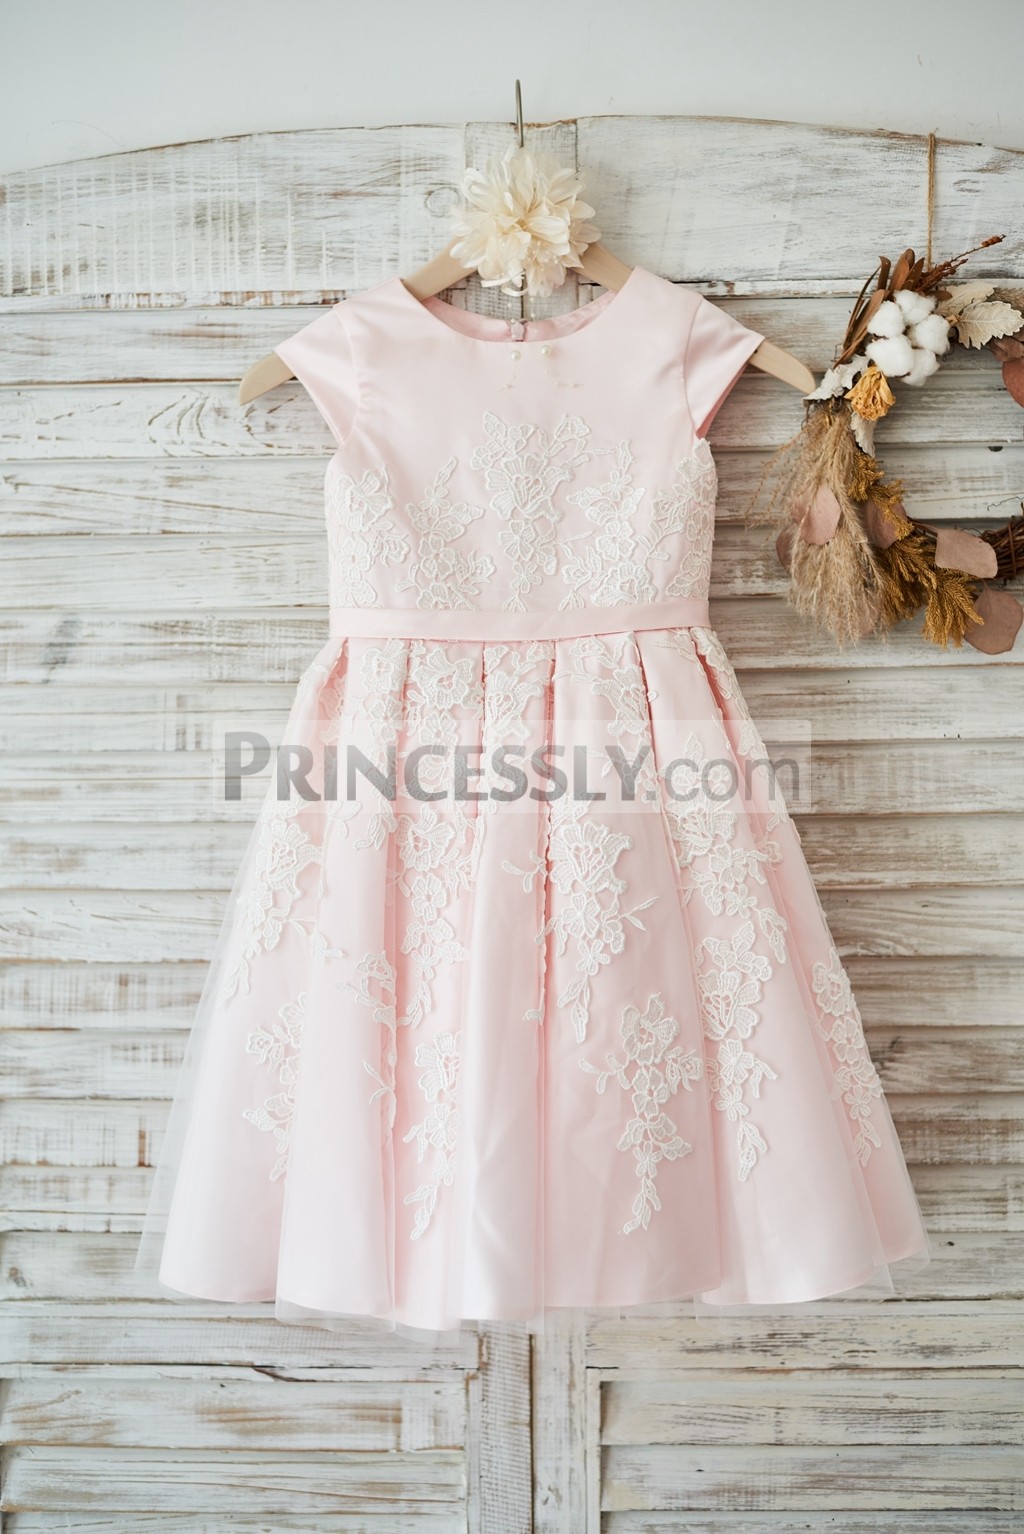 Cap sleeves ivory lace tulle overlay pink satin wedding flower girl dress